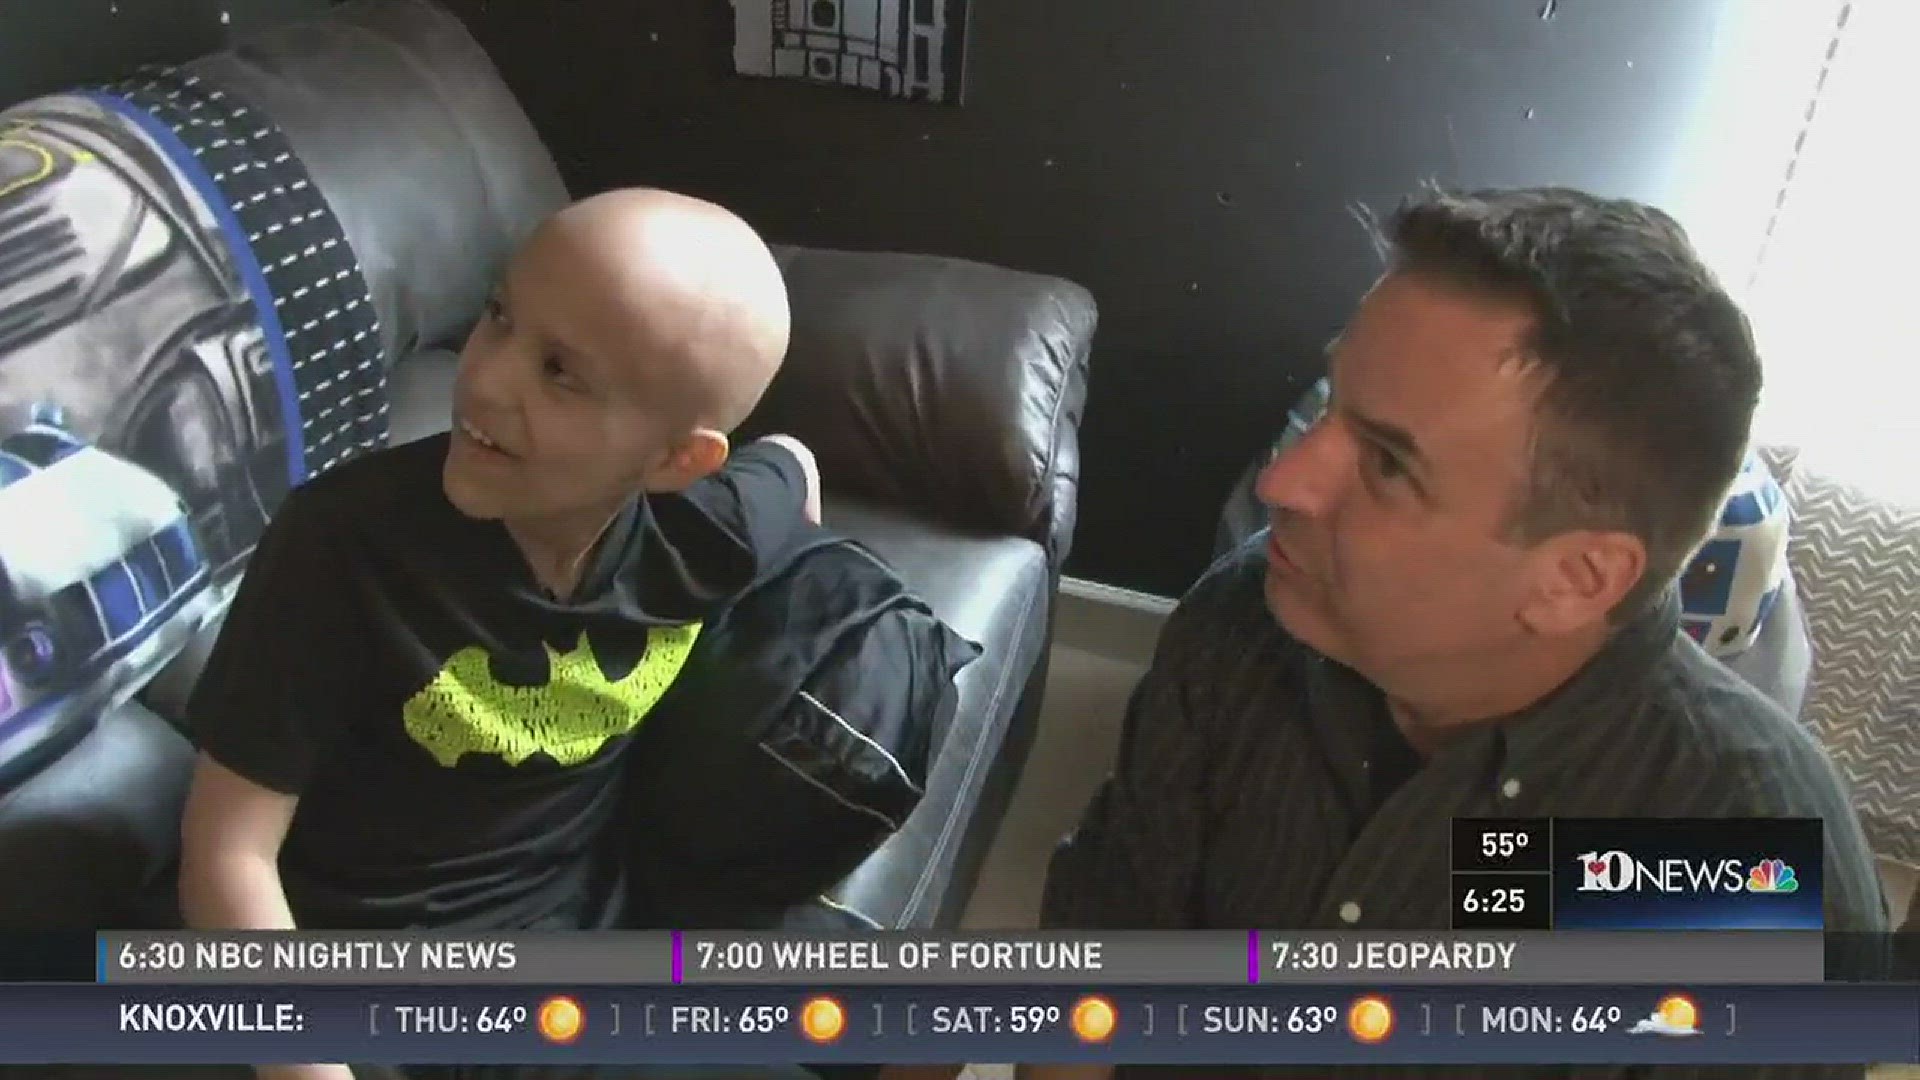 Nov. 9, 2016: The story of an 8-year-old Knoxville boy fighting cancer is inspiring people all over the country, and community members rallied together to give him a big surprise.